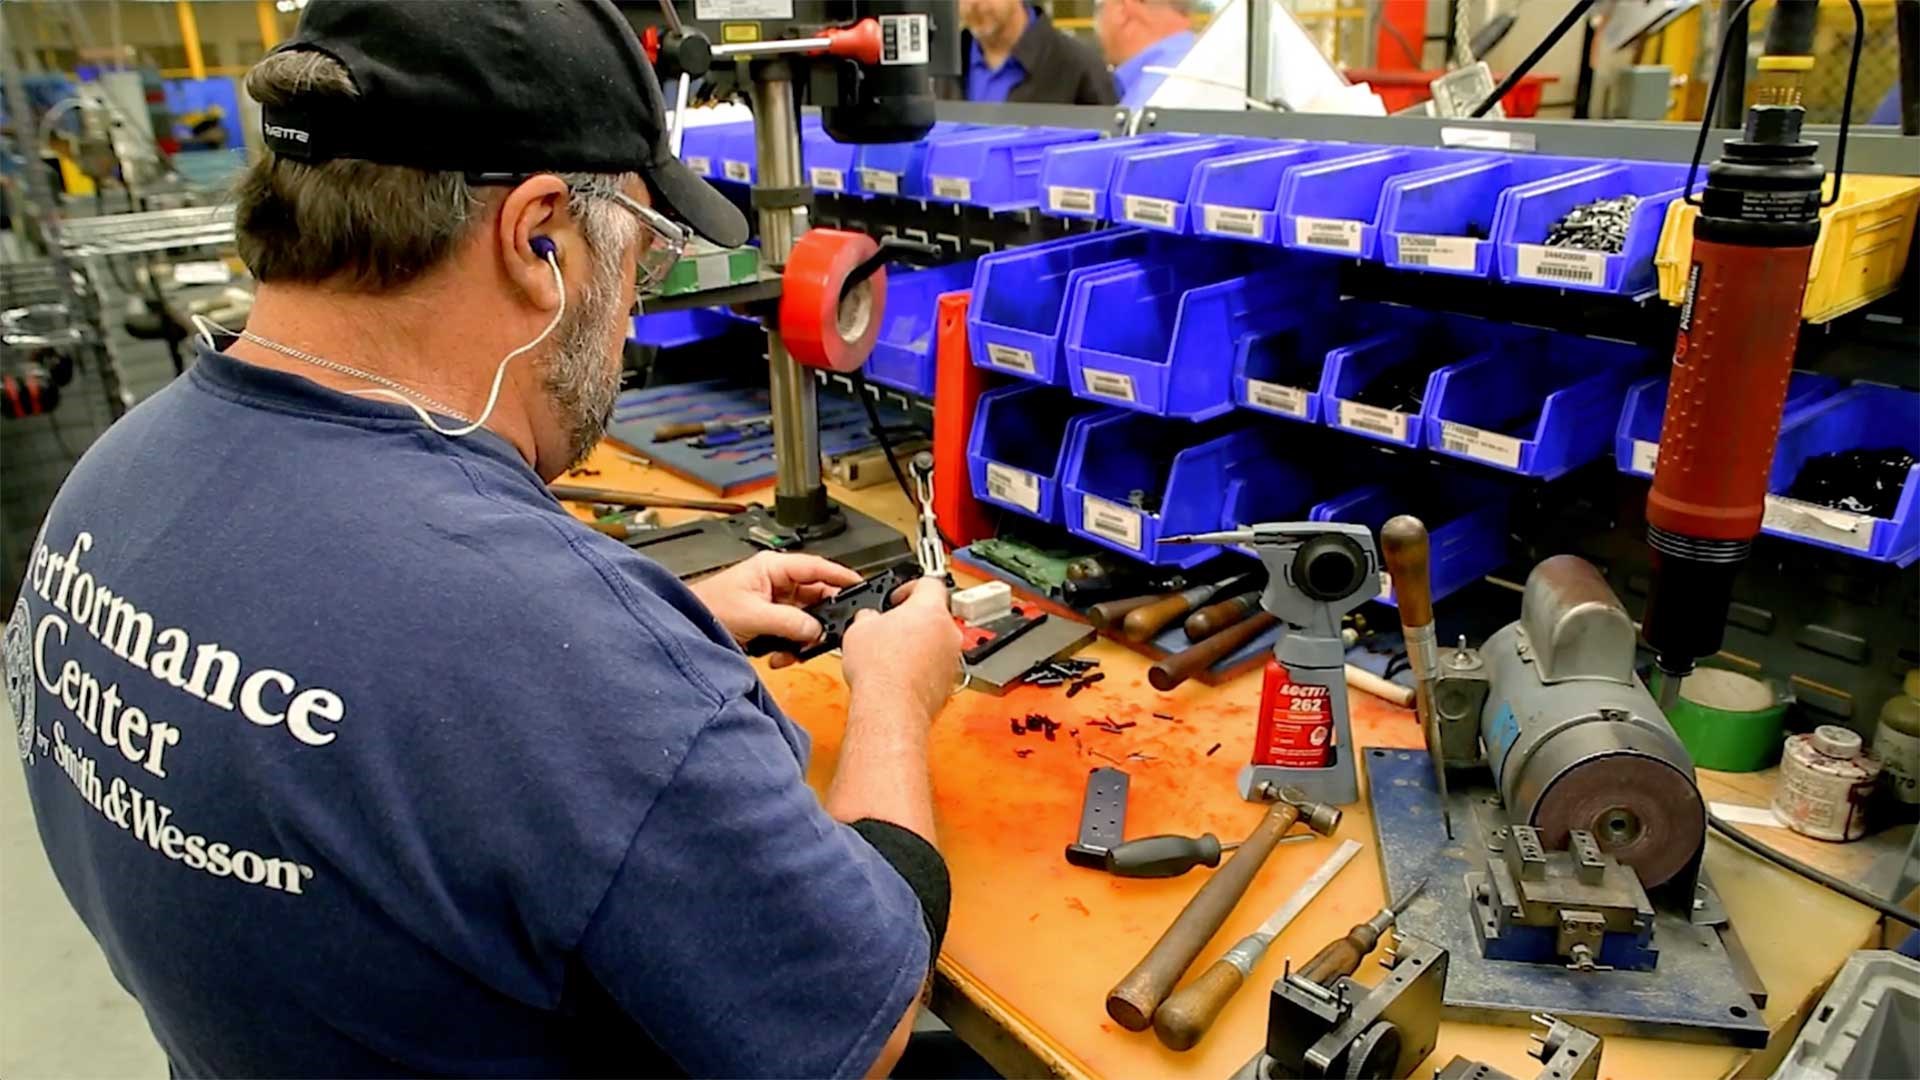 Smith & Wesson Performance Center employee working at a bench assembling a pistol.